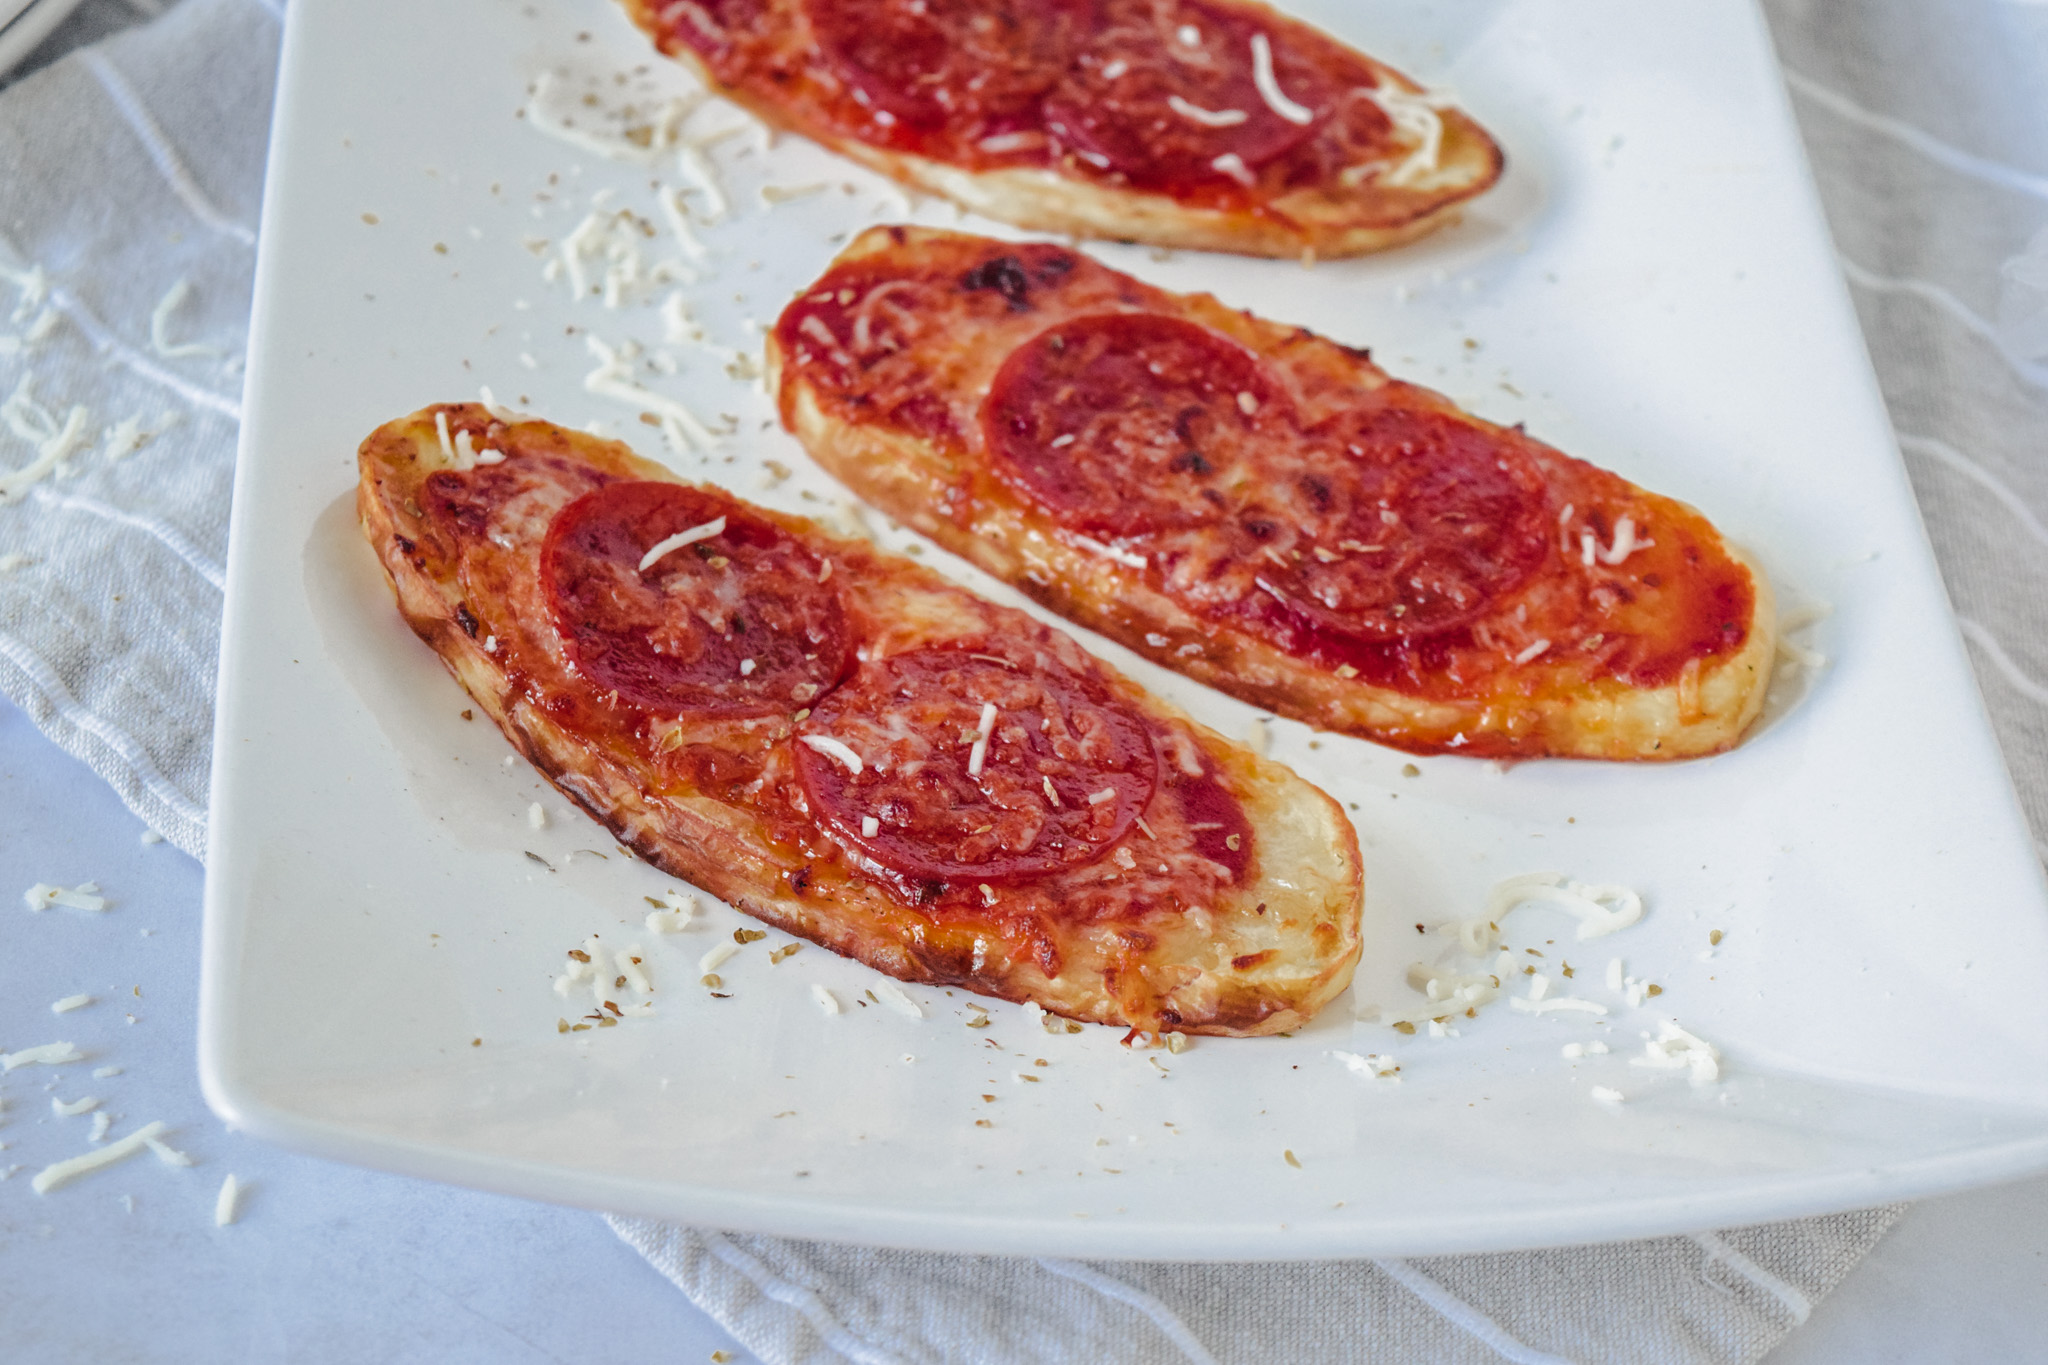 Broiled potato planks with pepperoni